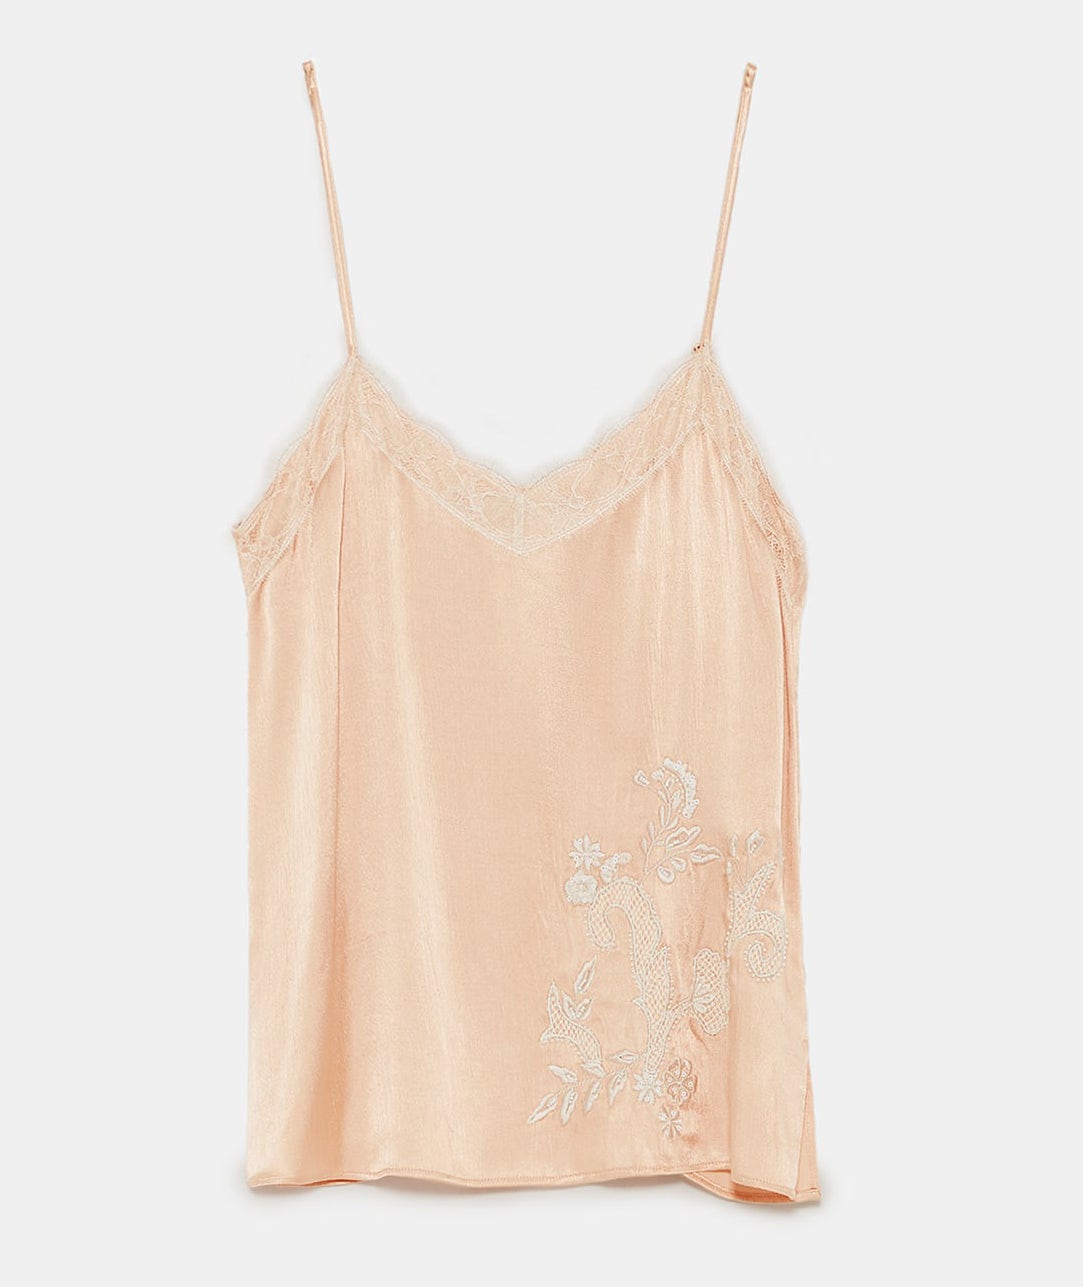  Zara nude pink embroidered camisole top